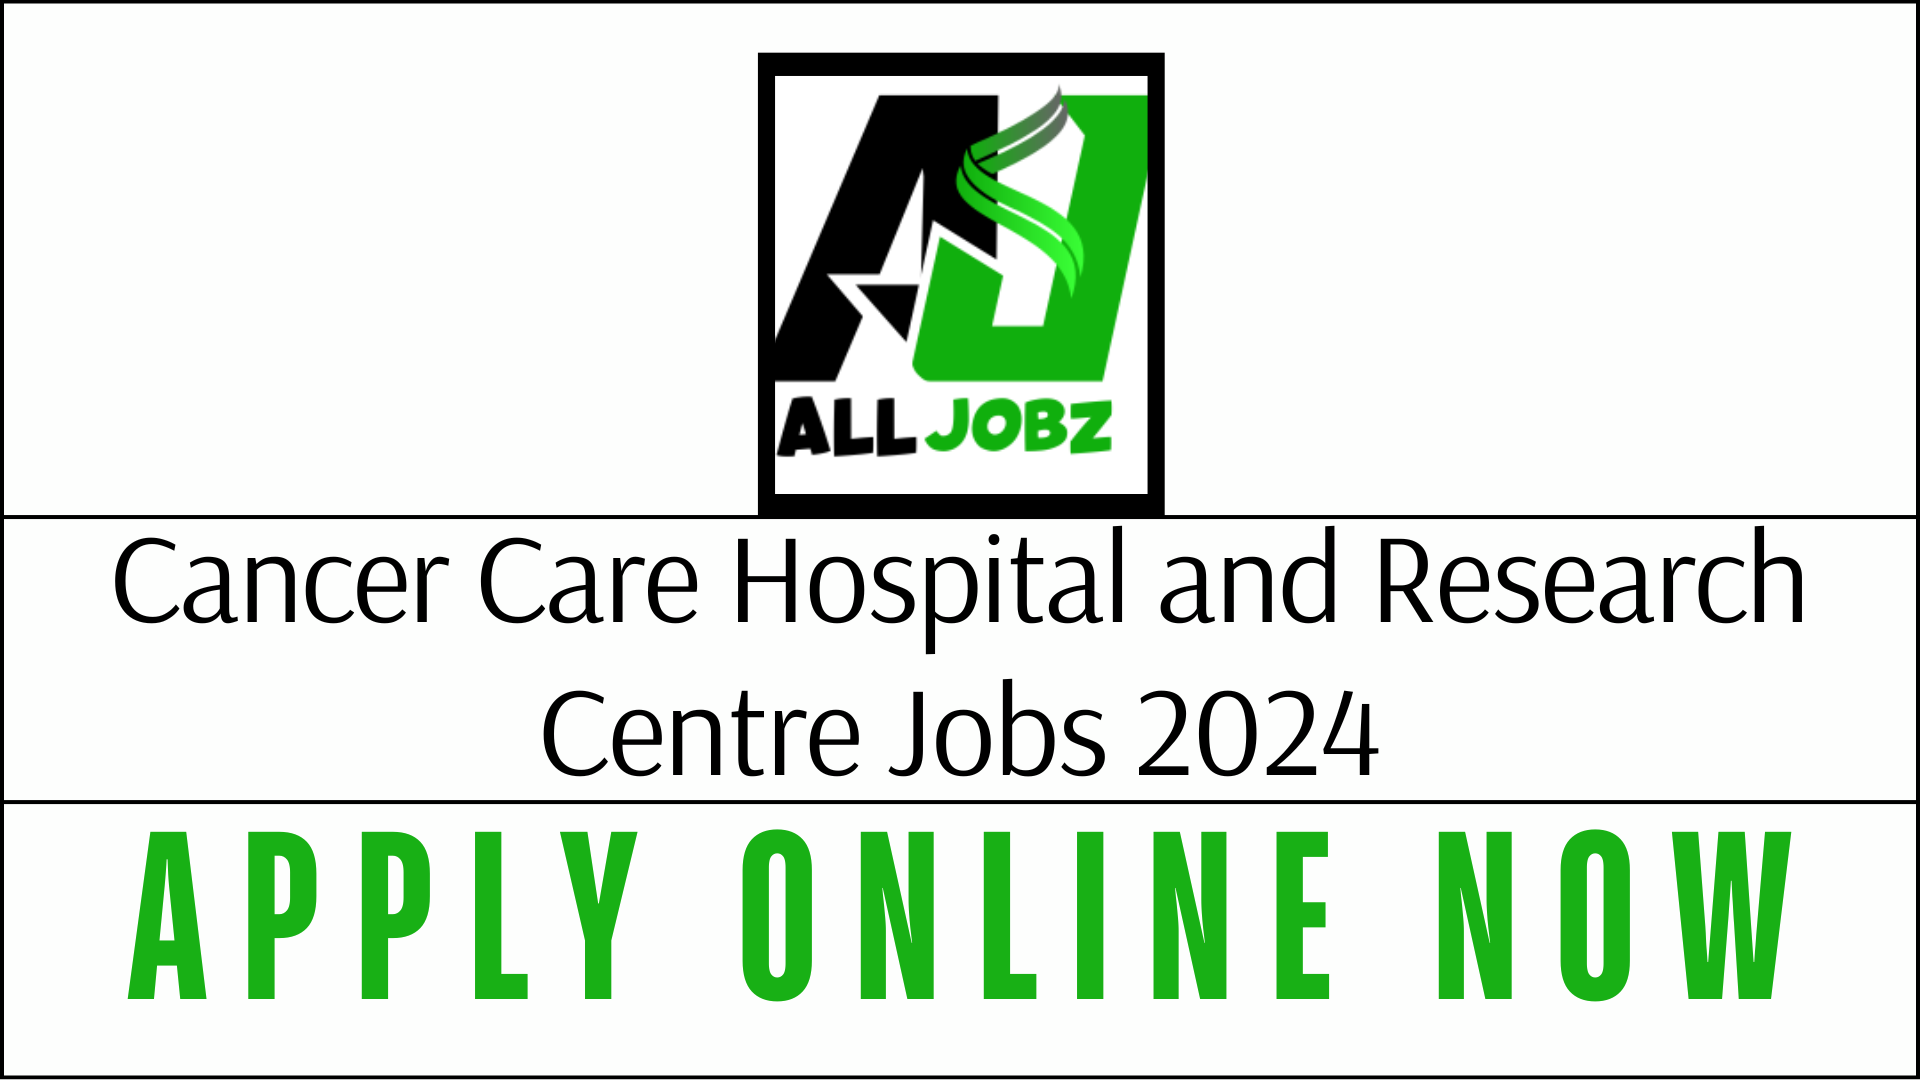 Cancer Care Hospital And Research Centre Jobs 2024, Cancer Care Hospital Employment Opportunities, Research Centre Job Openings 2024, Healthcare Careers At Cancer Care Hospital, Medical Jobs At Research Centre 2024, Oncology Positions At Cancer Care Hospital, Hospital Employment In 2024, Medical Research Jobs At Cancer Care Hospital, Healthcare Opportunities In 2024, Hospital Careers And Vacancies 2024, Cancer Research Jobs 2024, Medical Staff Recruitment At Cancer Care Hospital,